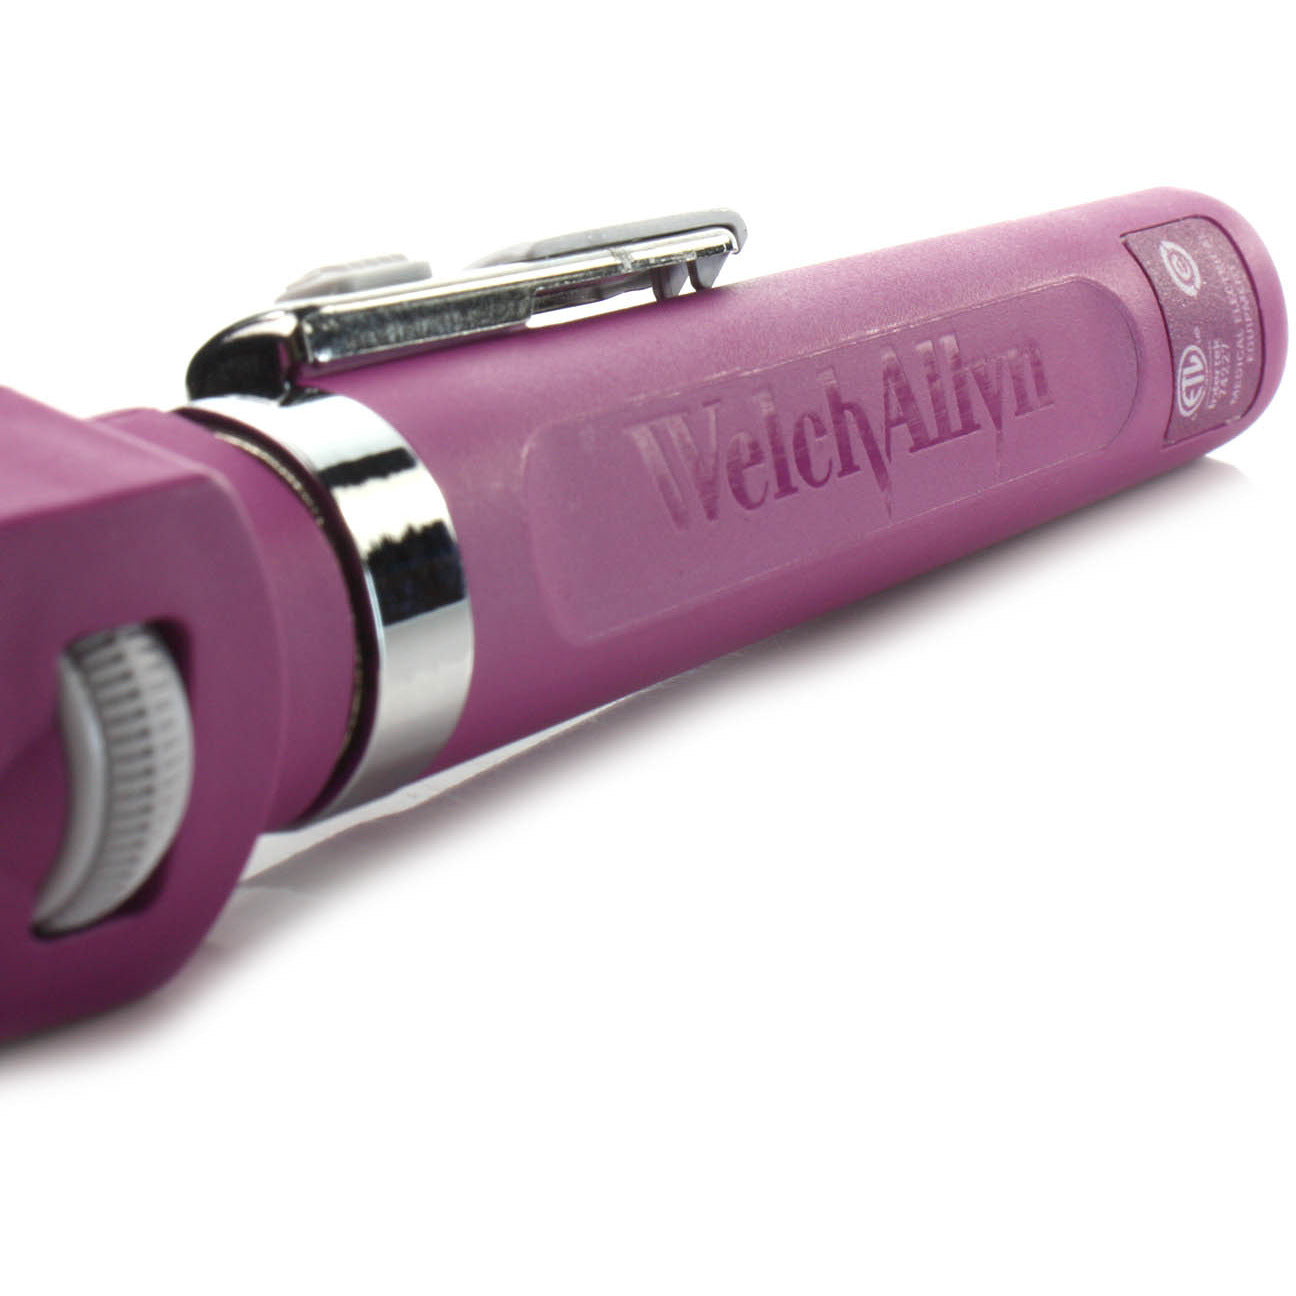 Welch Allyn Pocket PLUS LED Ophthalmoscope - Mulberry